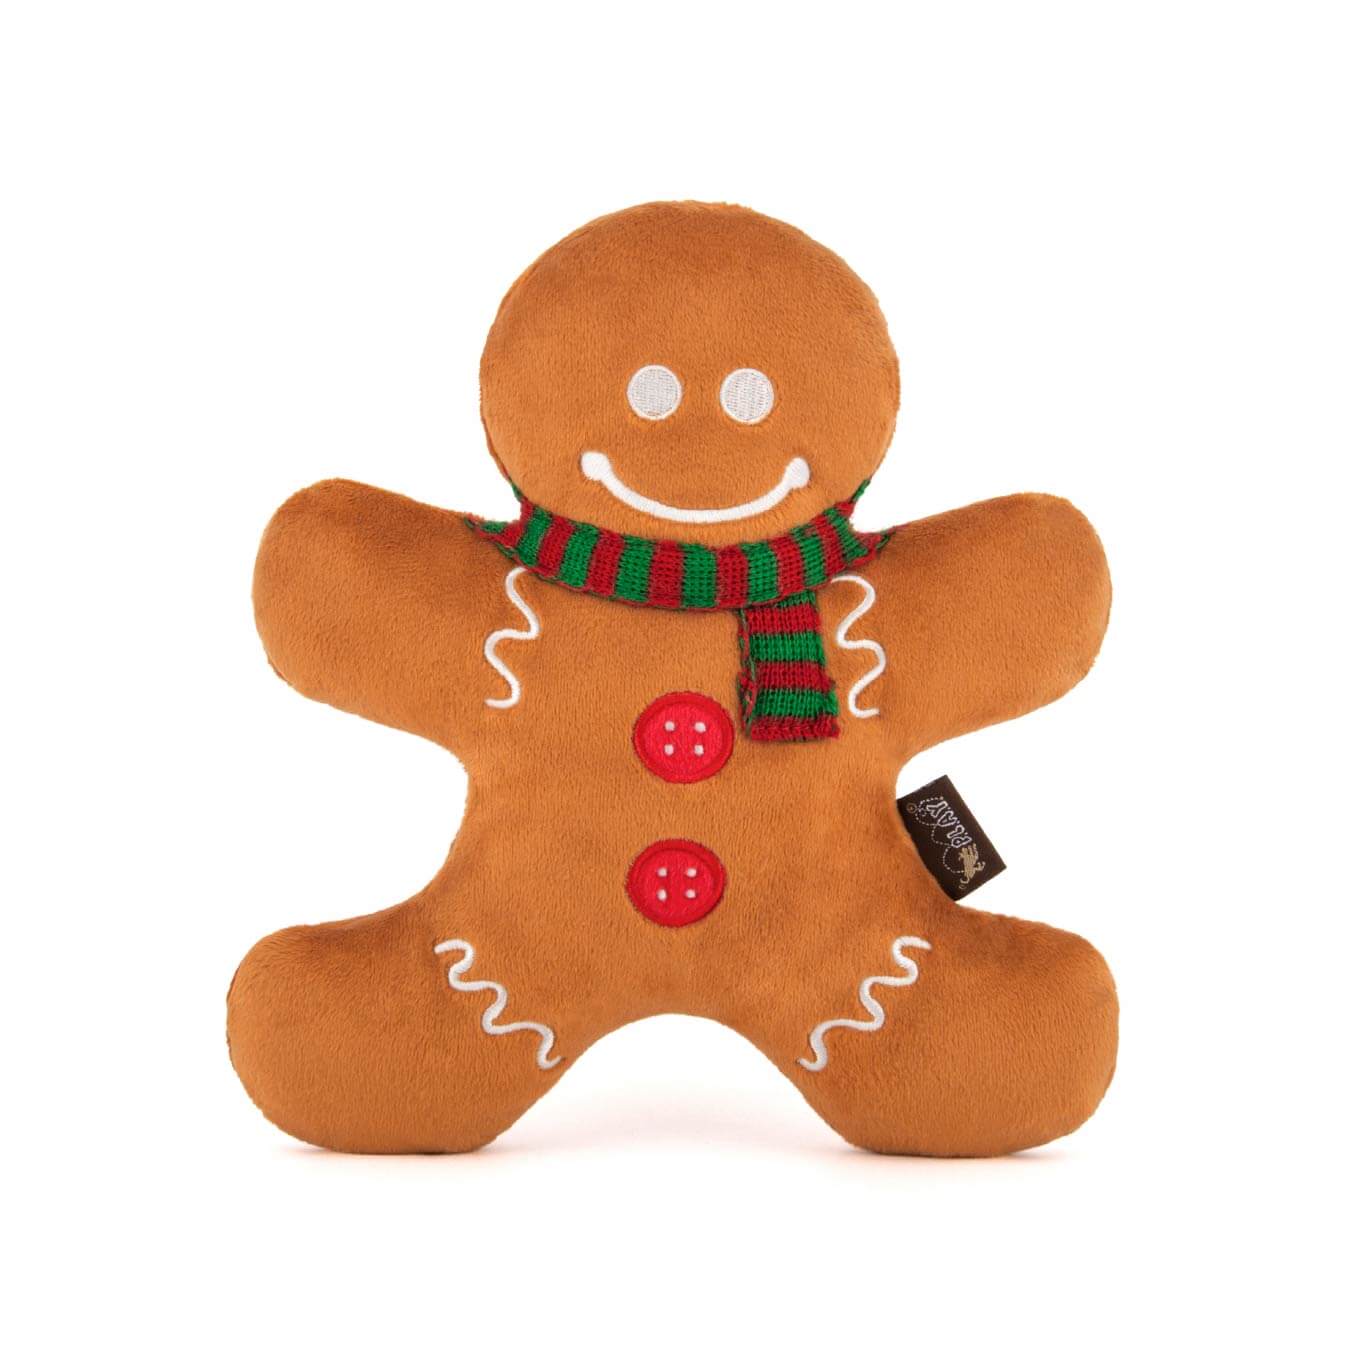 PLAY Holiday Classic Gingerbread Man Plush Toy - Vanillapup Online Pet Store